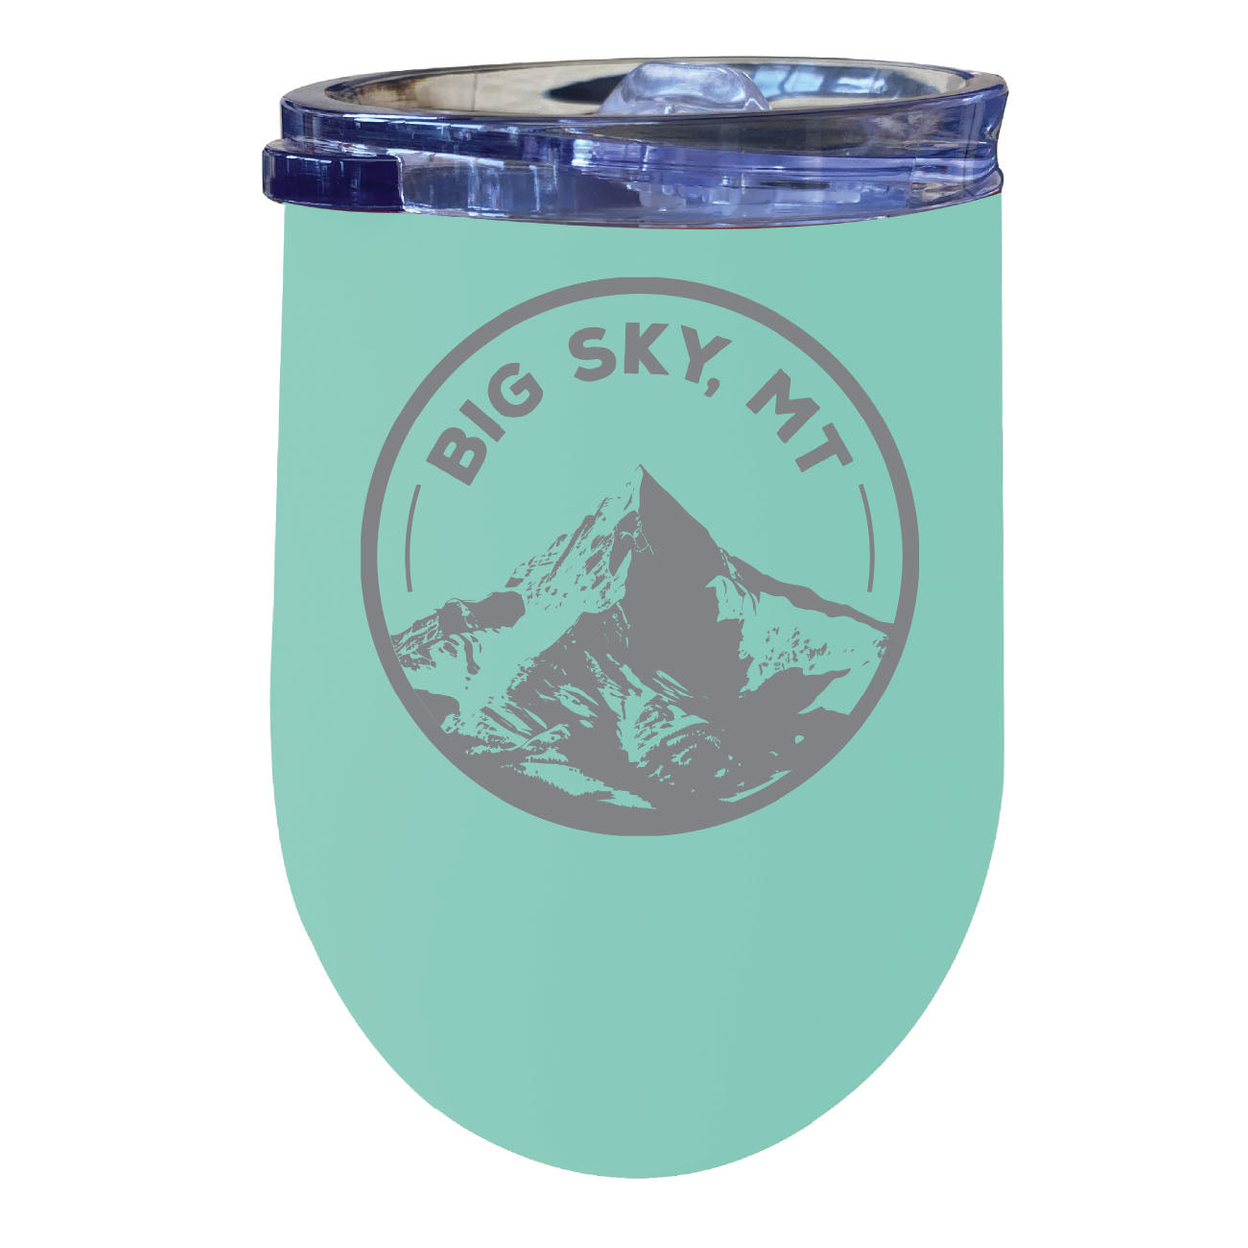 Big Sky Montana Souvenir 12 Oz Engraved Insulated Wine Stainless Steel Tumbler - Seafoam,,4-Pack